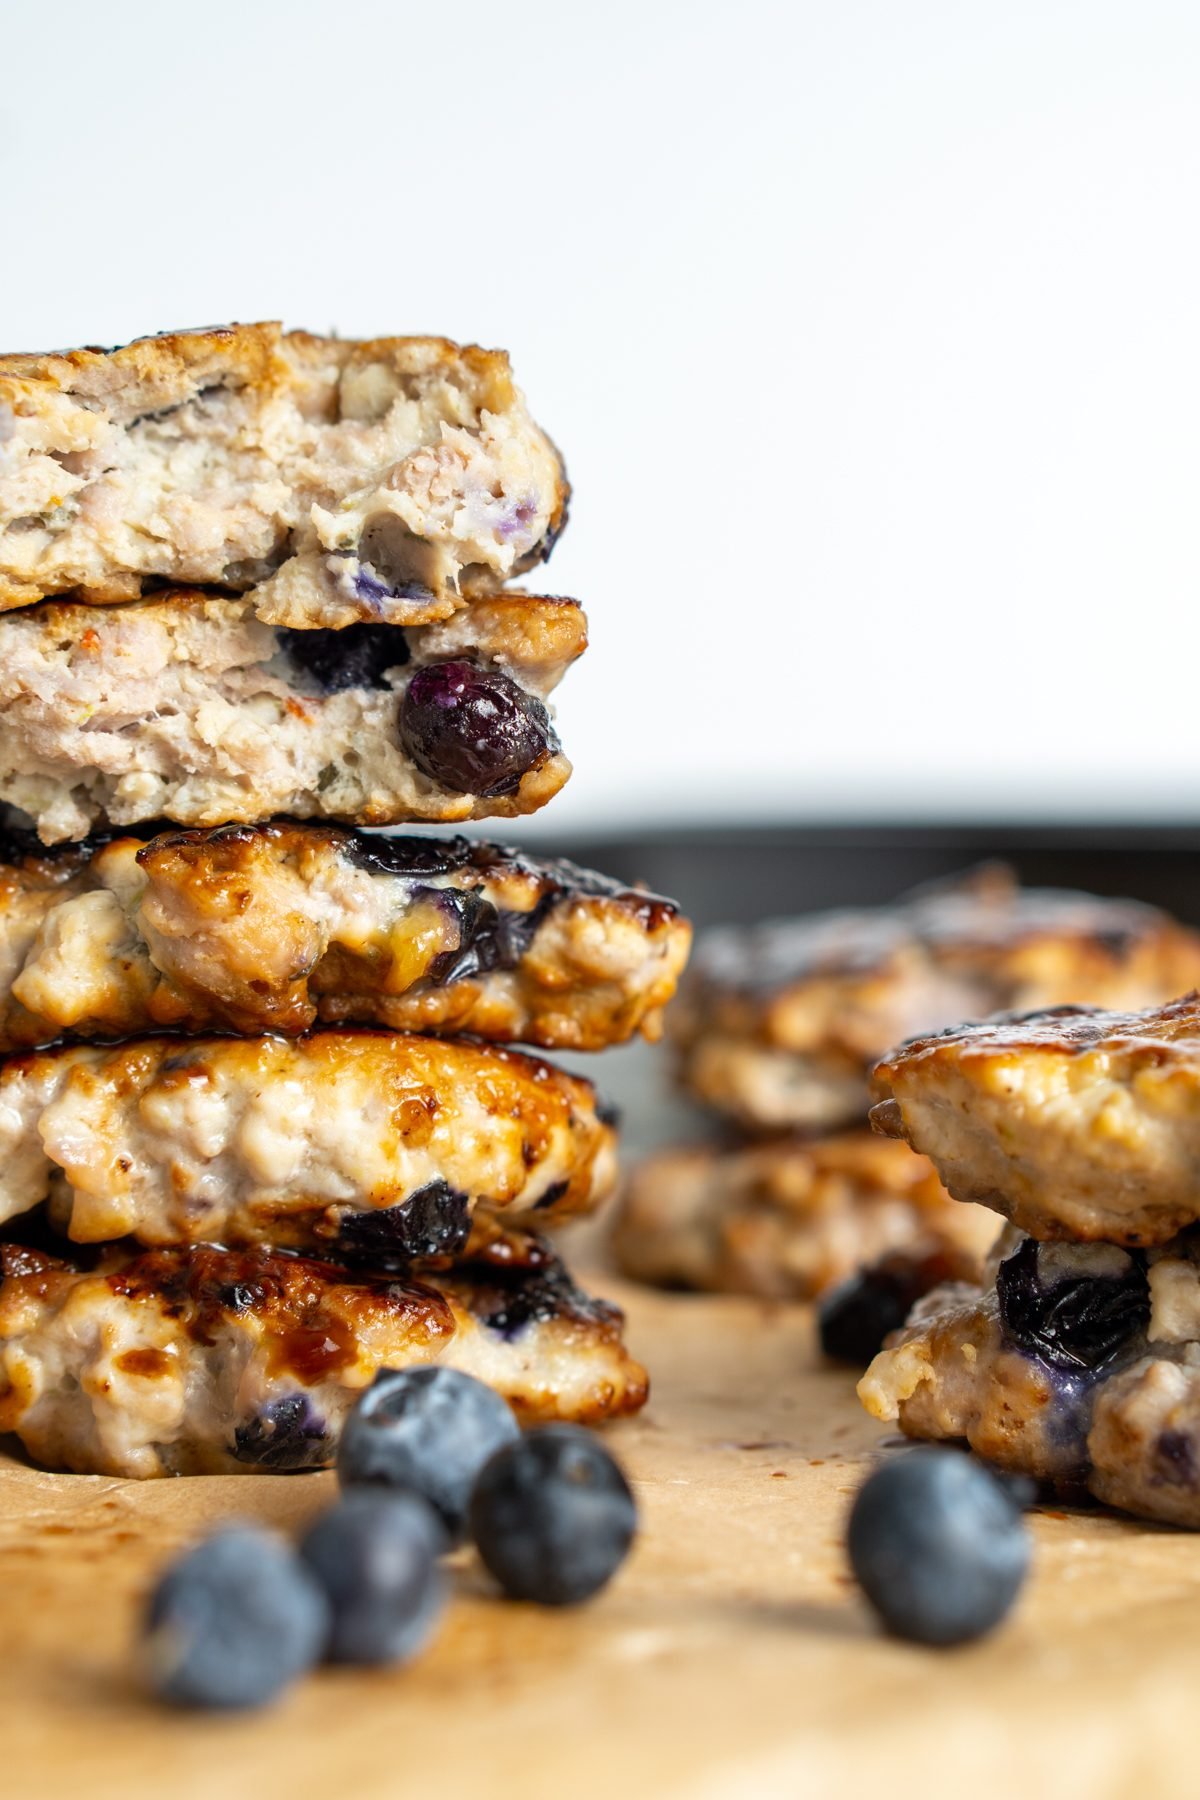 Stack of blueberry breakfast sausage, some of which are missing bites.